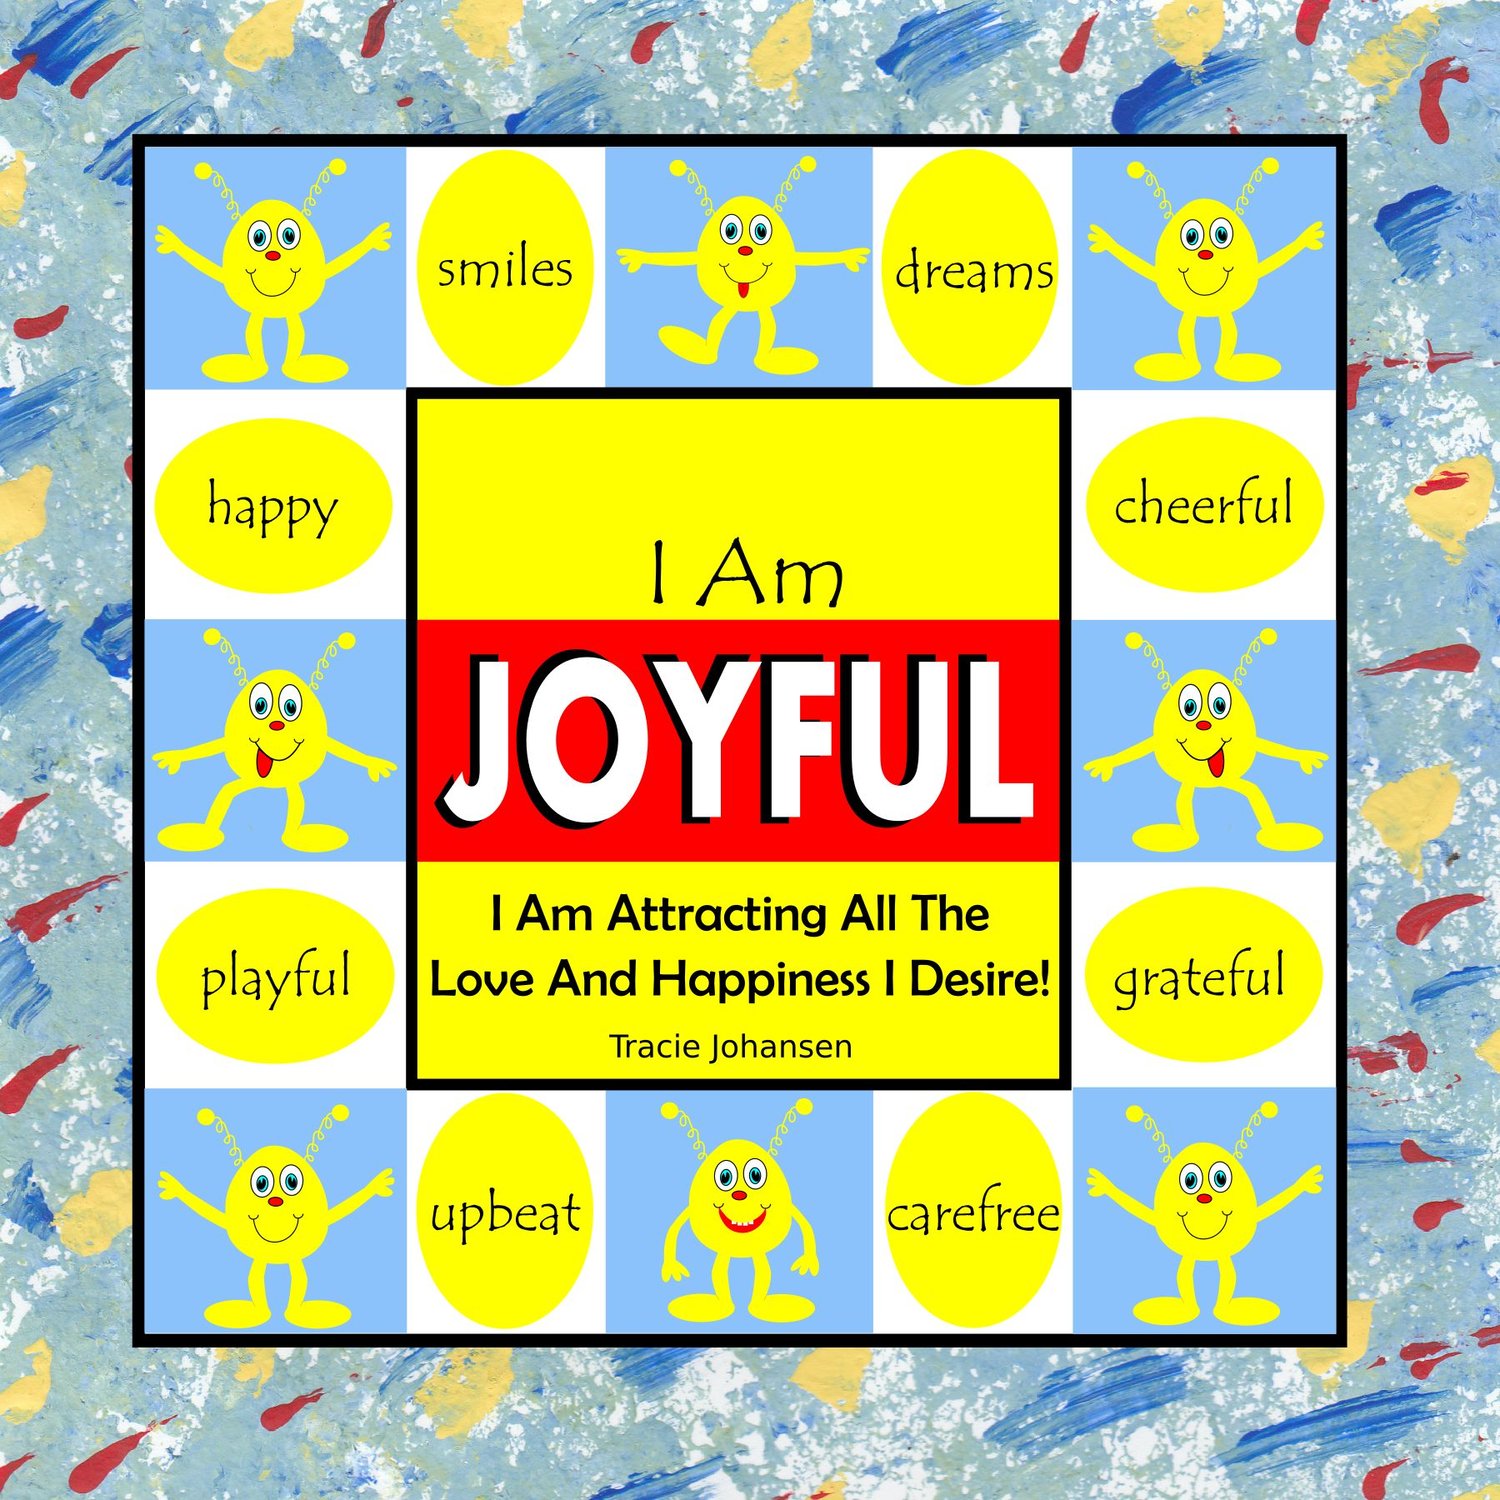 Happiness Affirmations for fun days